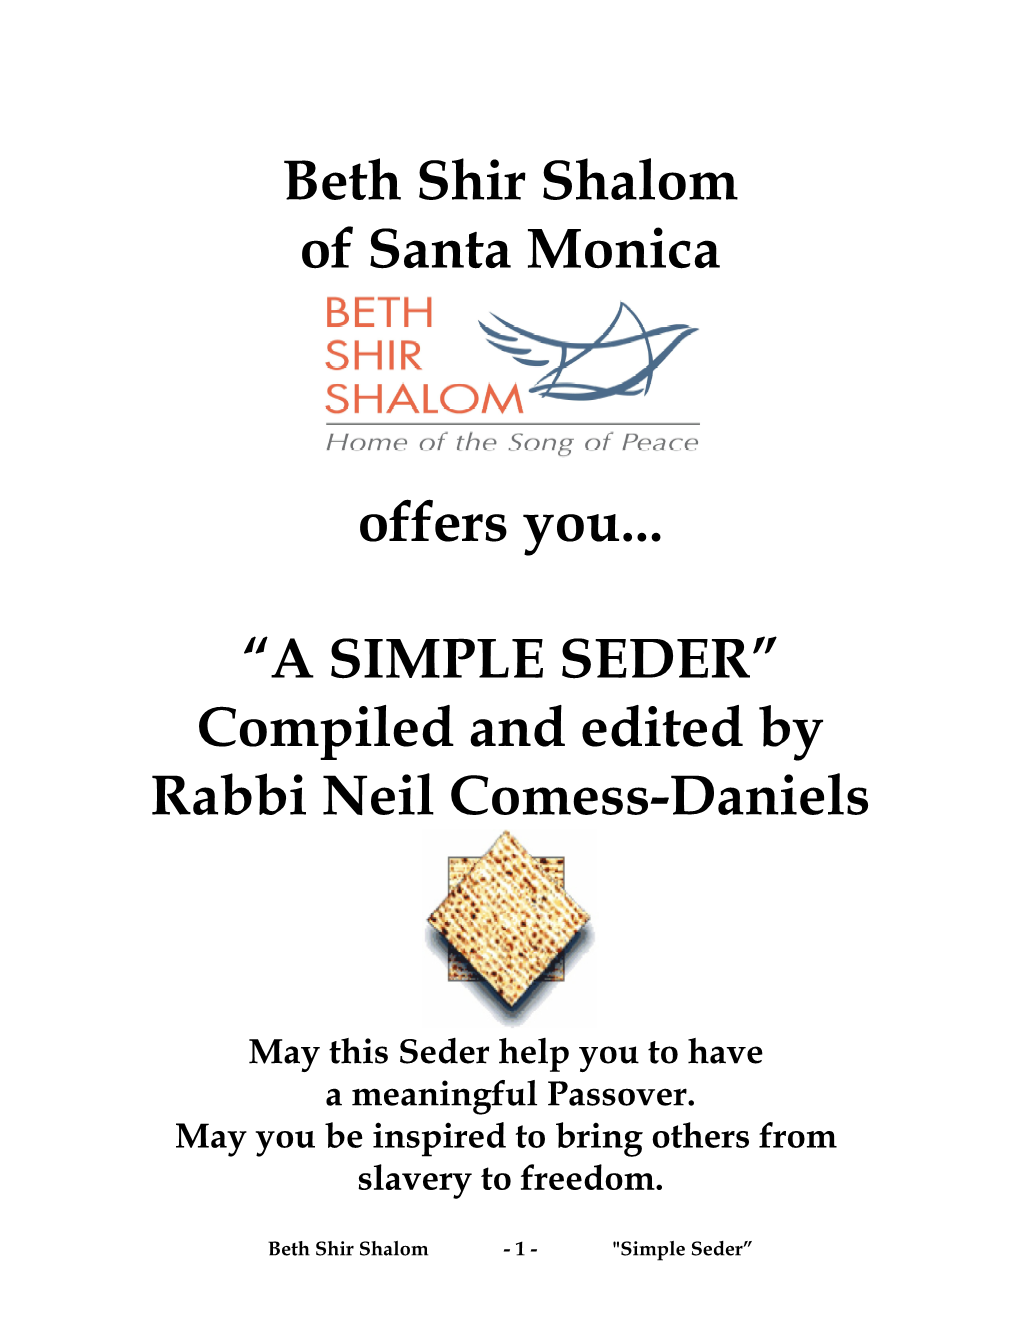 SIMPLE SEDER” Compiled and Edited by Rabbi Neil Comess-Daniels